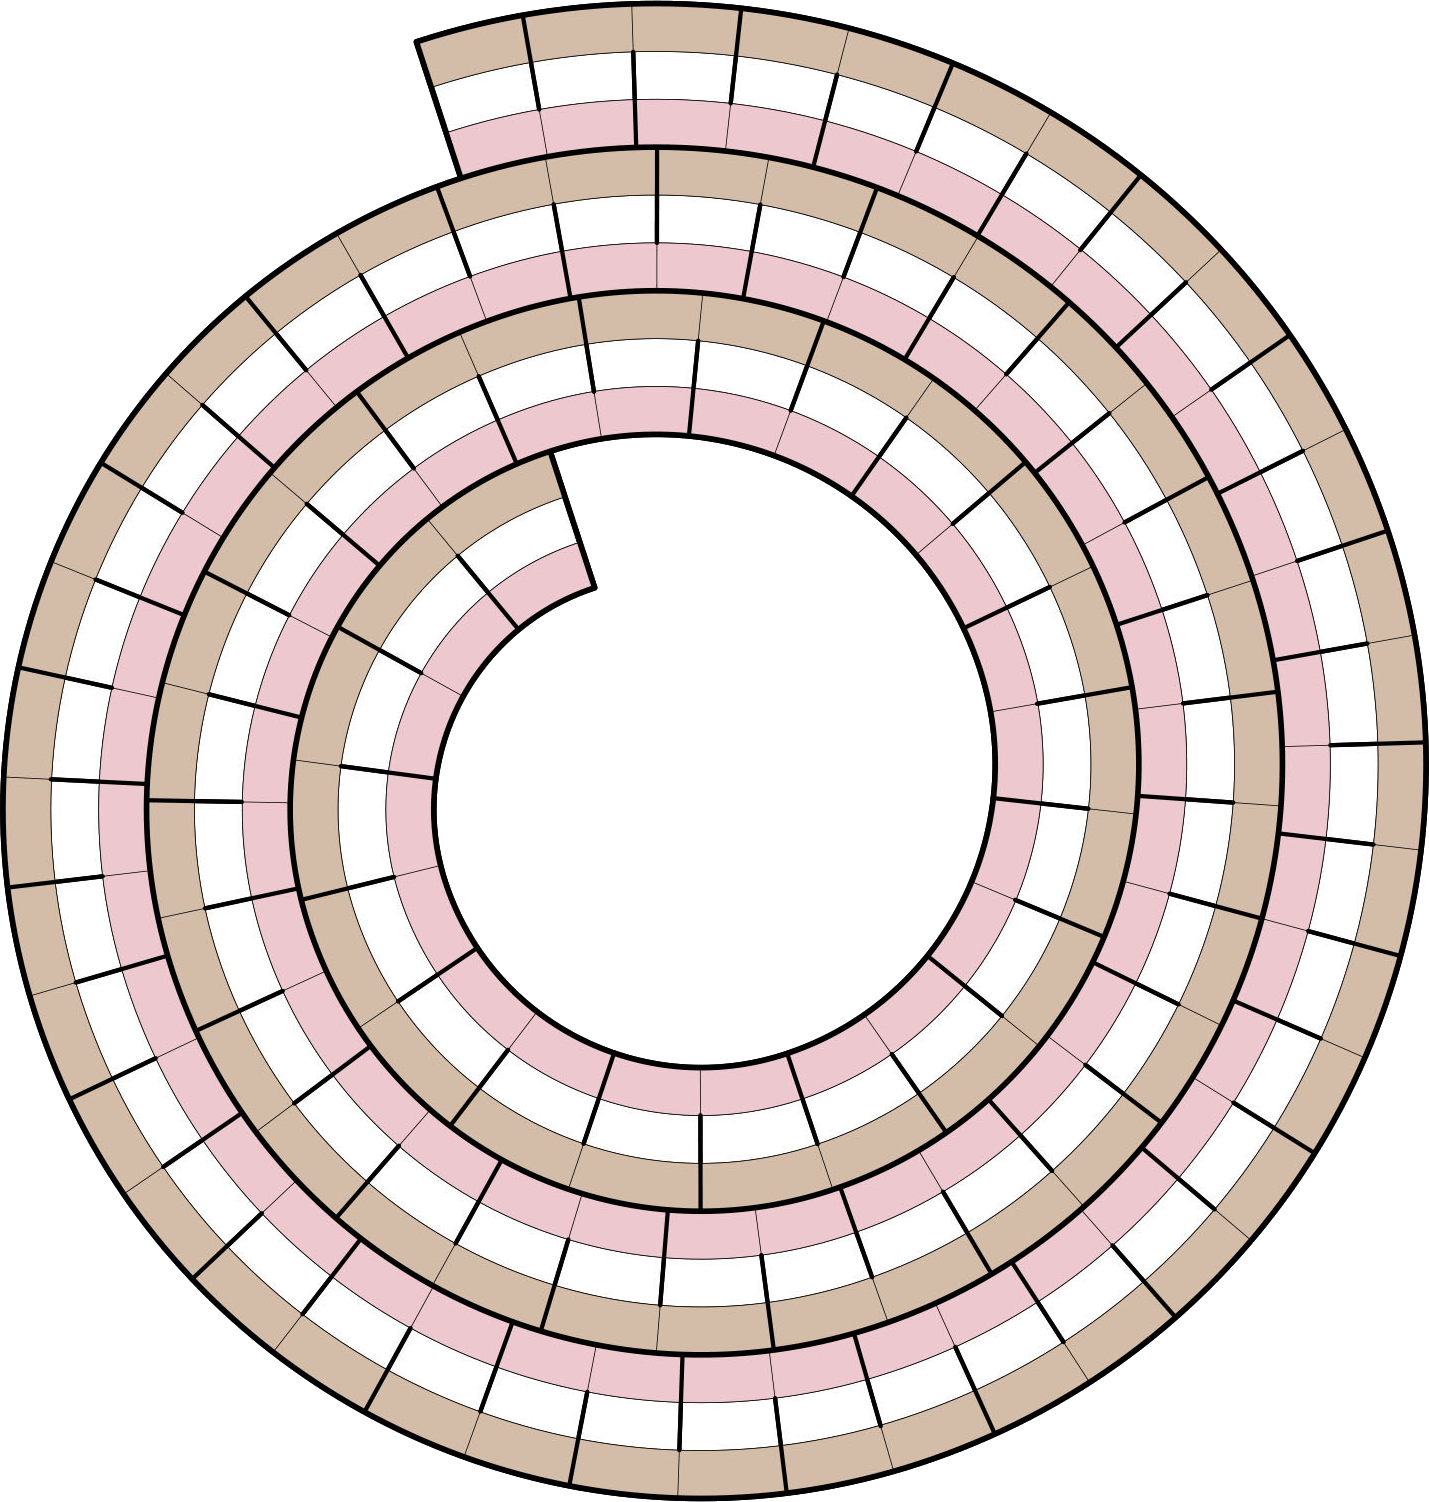 Spiral grid with tan, white, and pink spiral sections with 93 spaces of each color